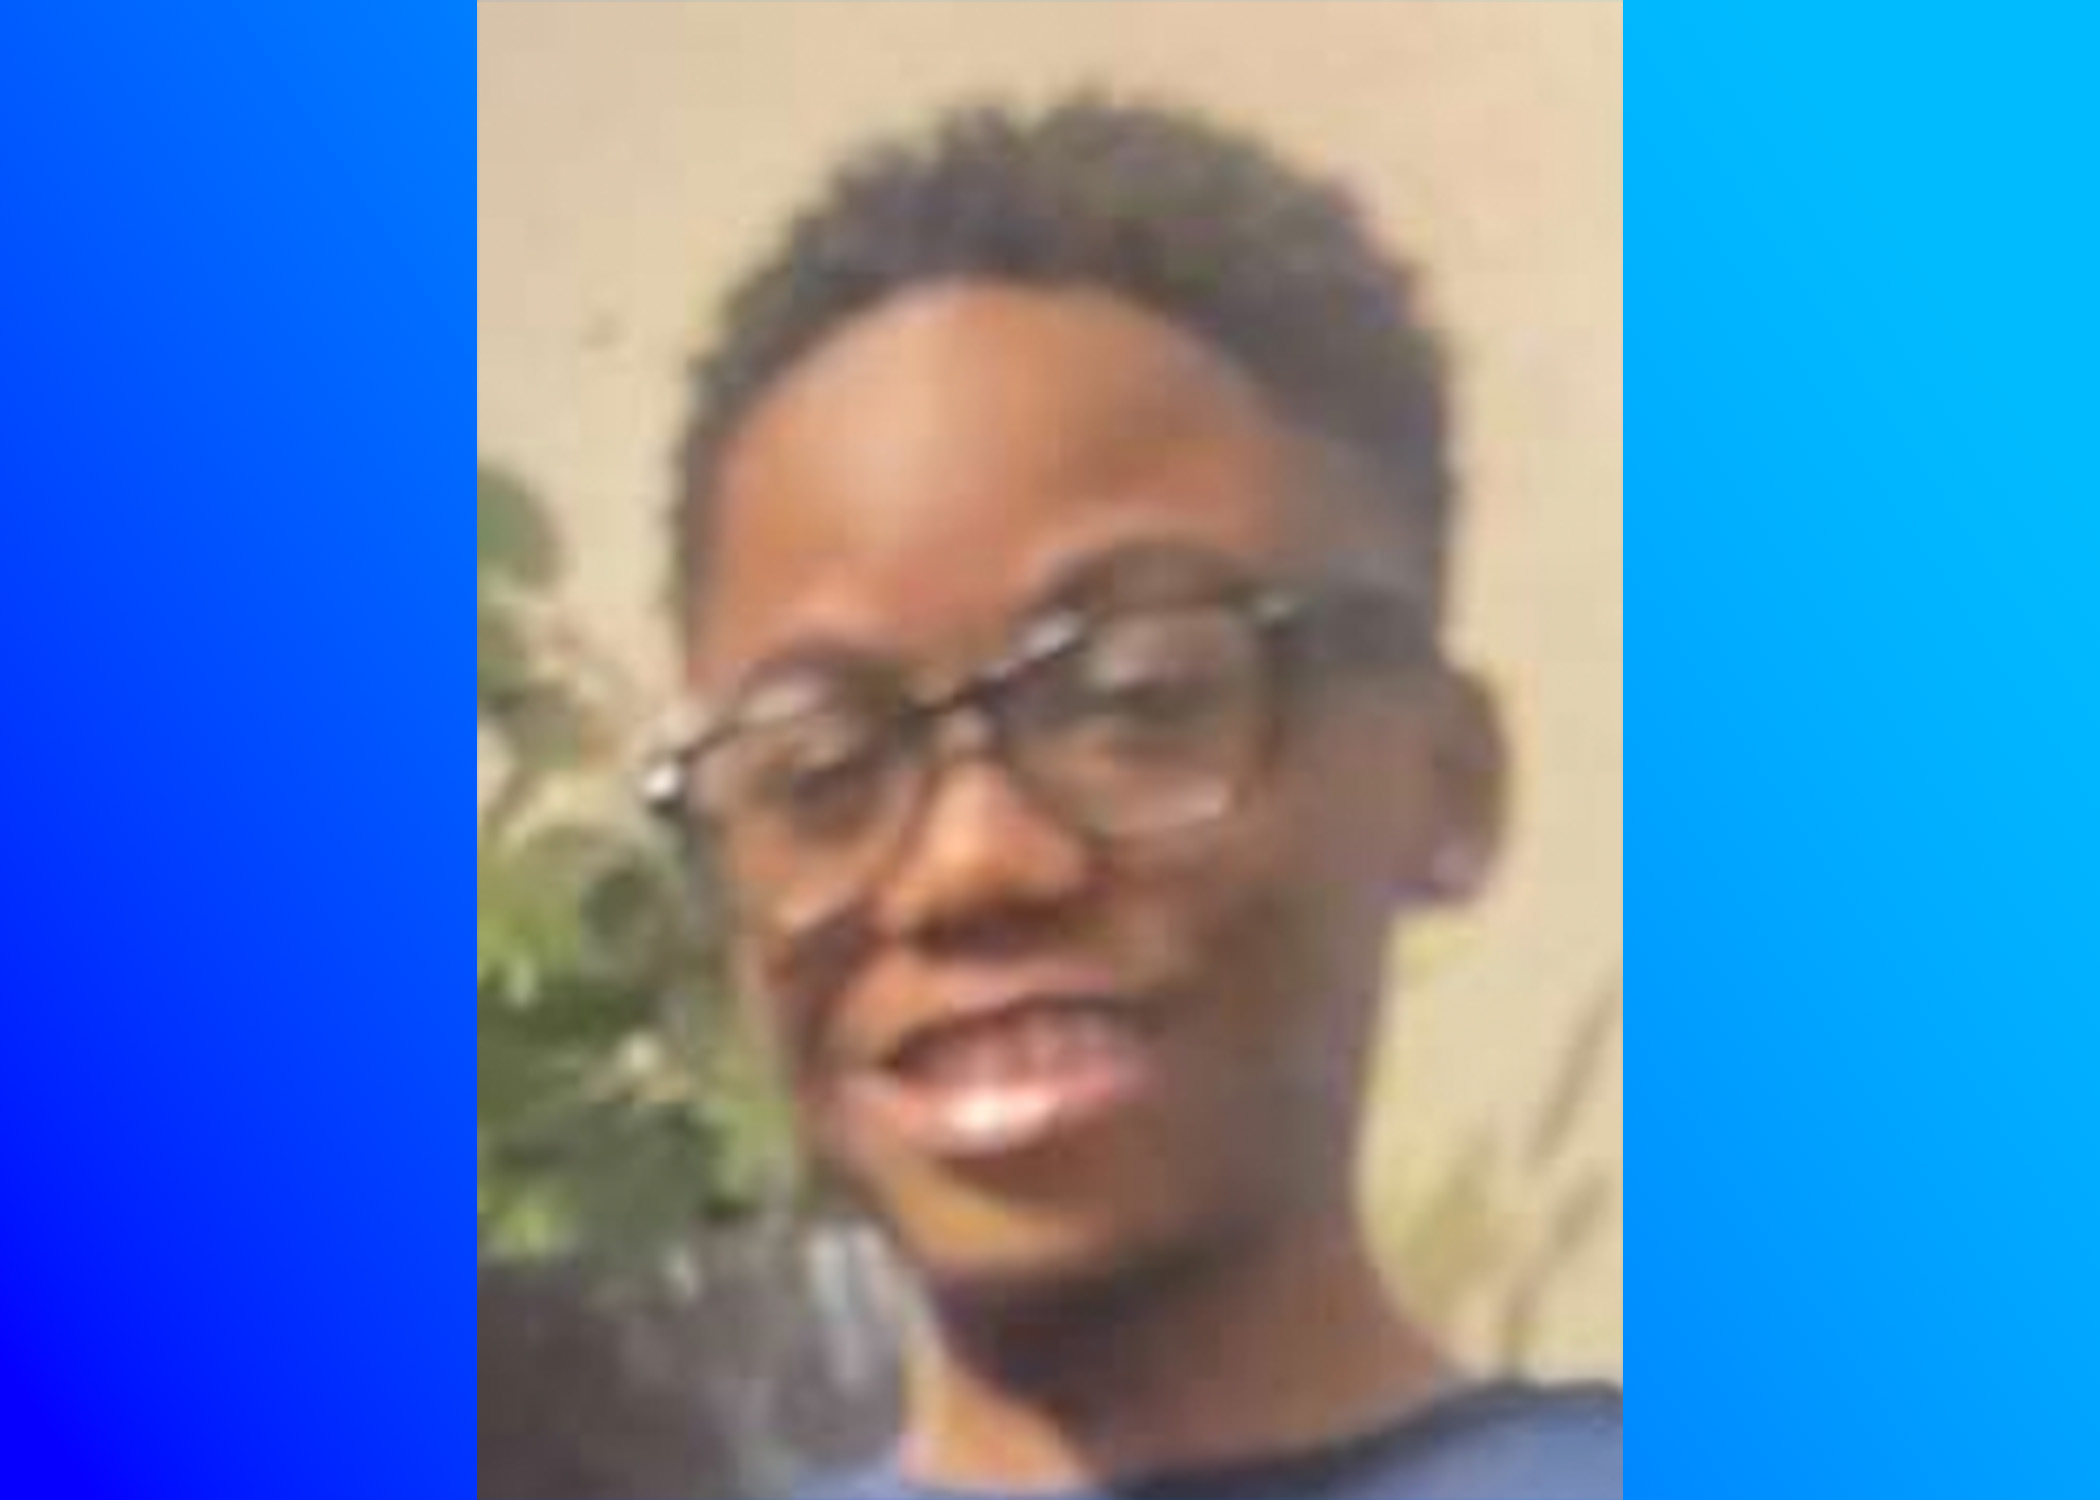 CANCELED: Authorities seek 12-year-old boy missing from Montgomery